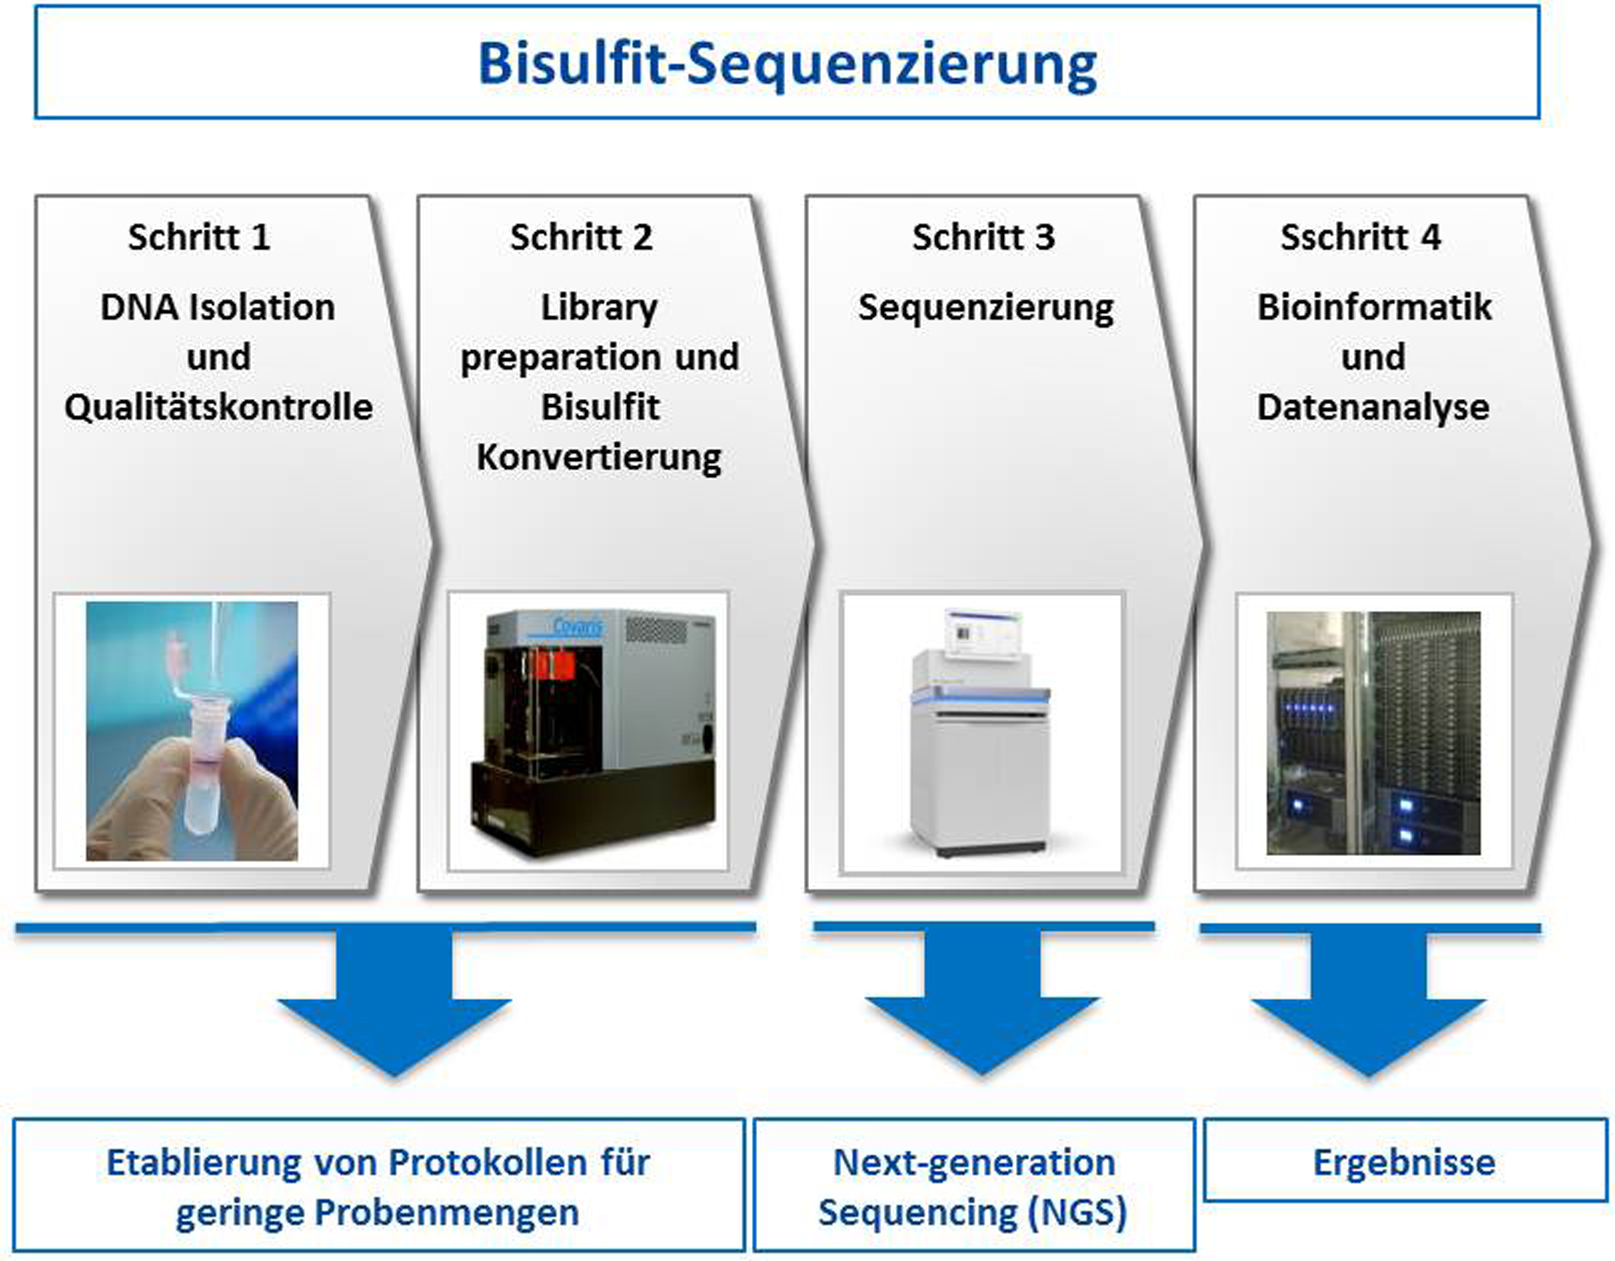 The diagram shows schematically how bisulphite sequencing works and the devices needed for doing so.